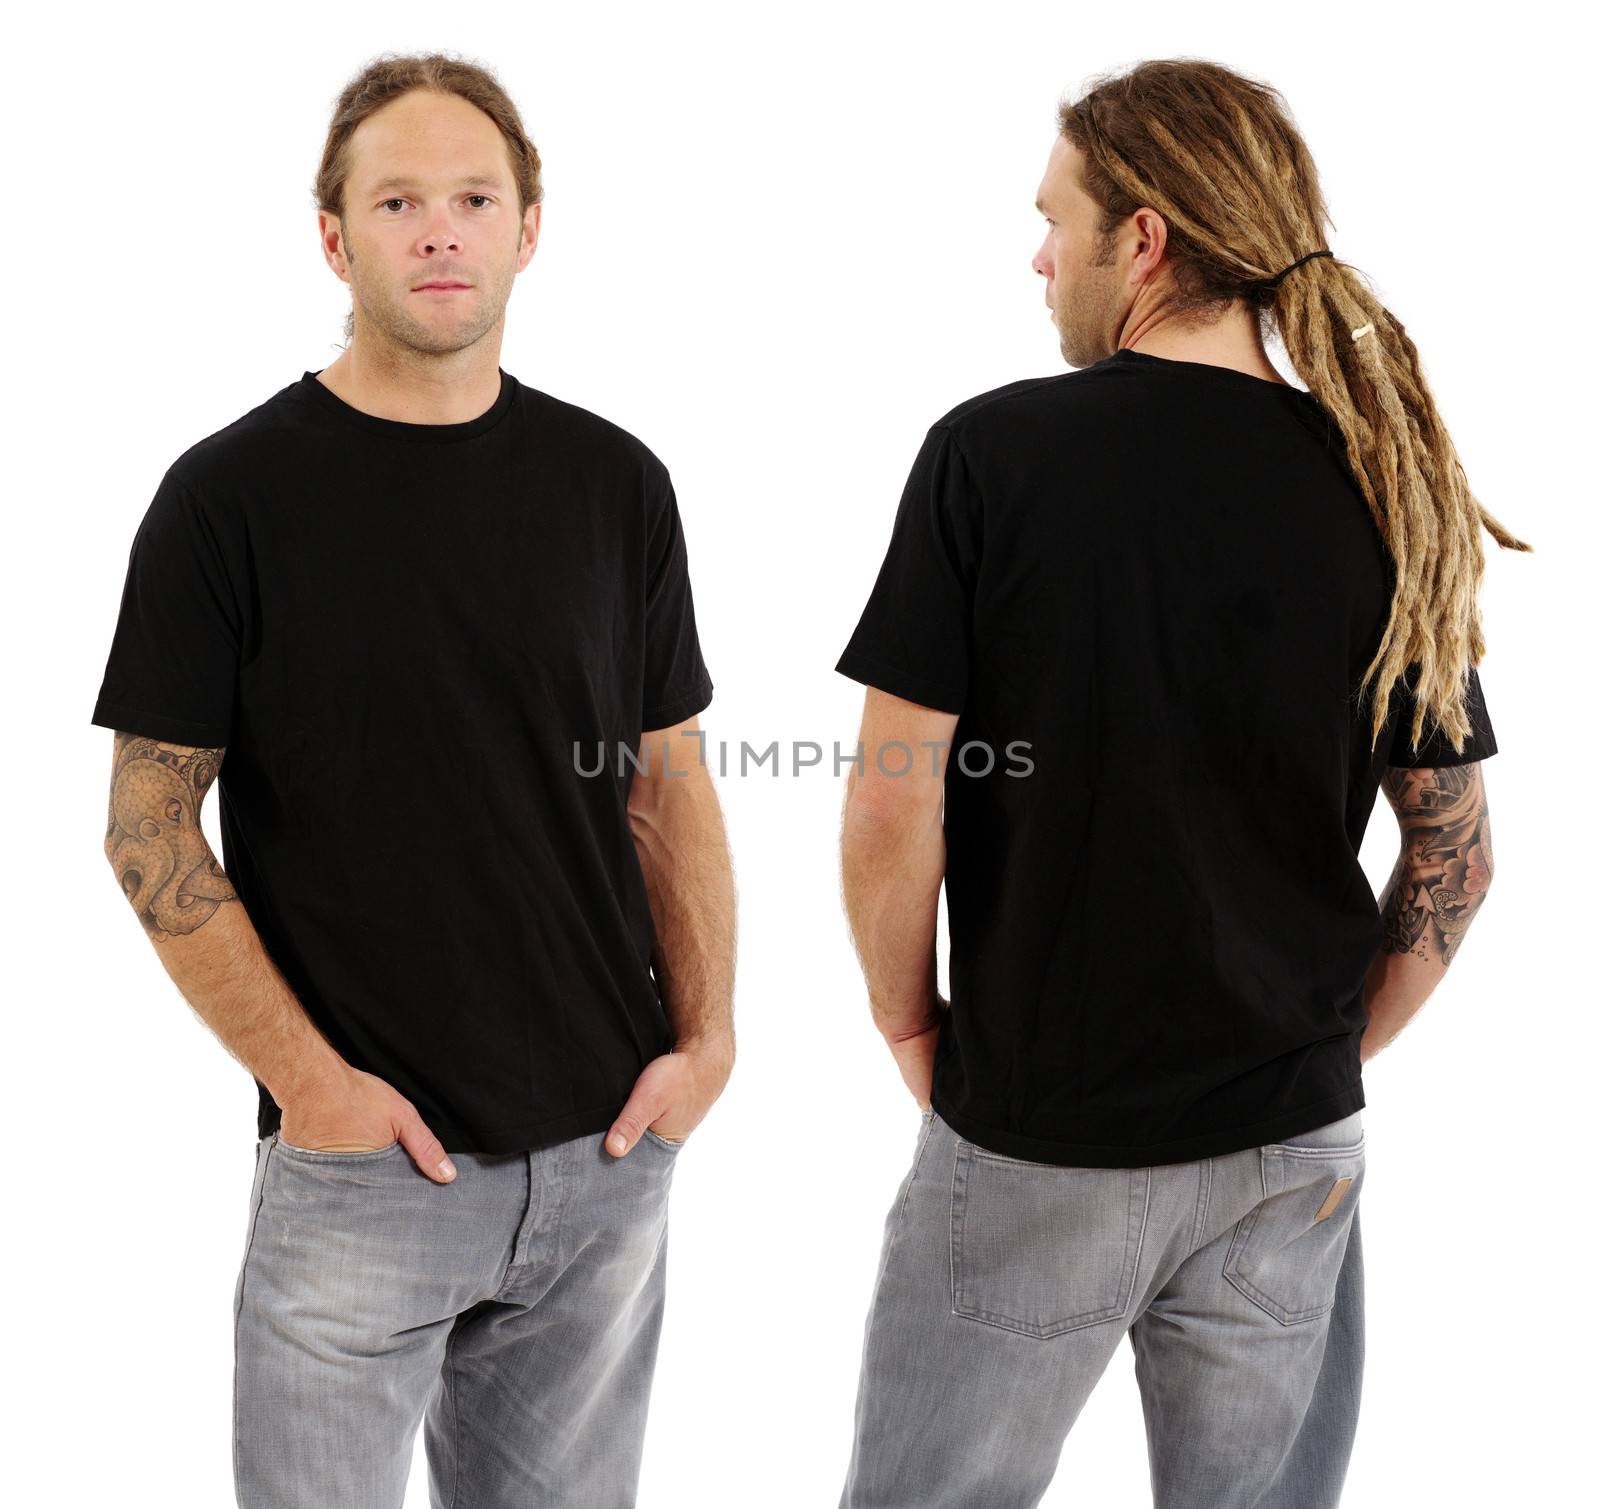 Photo of a male in his early thirties with long dreadlocks and posing with a blank black shirt.  Front and back views ready for your artwork or designs.
